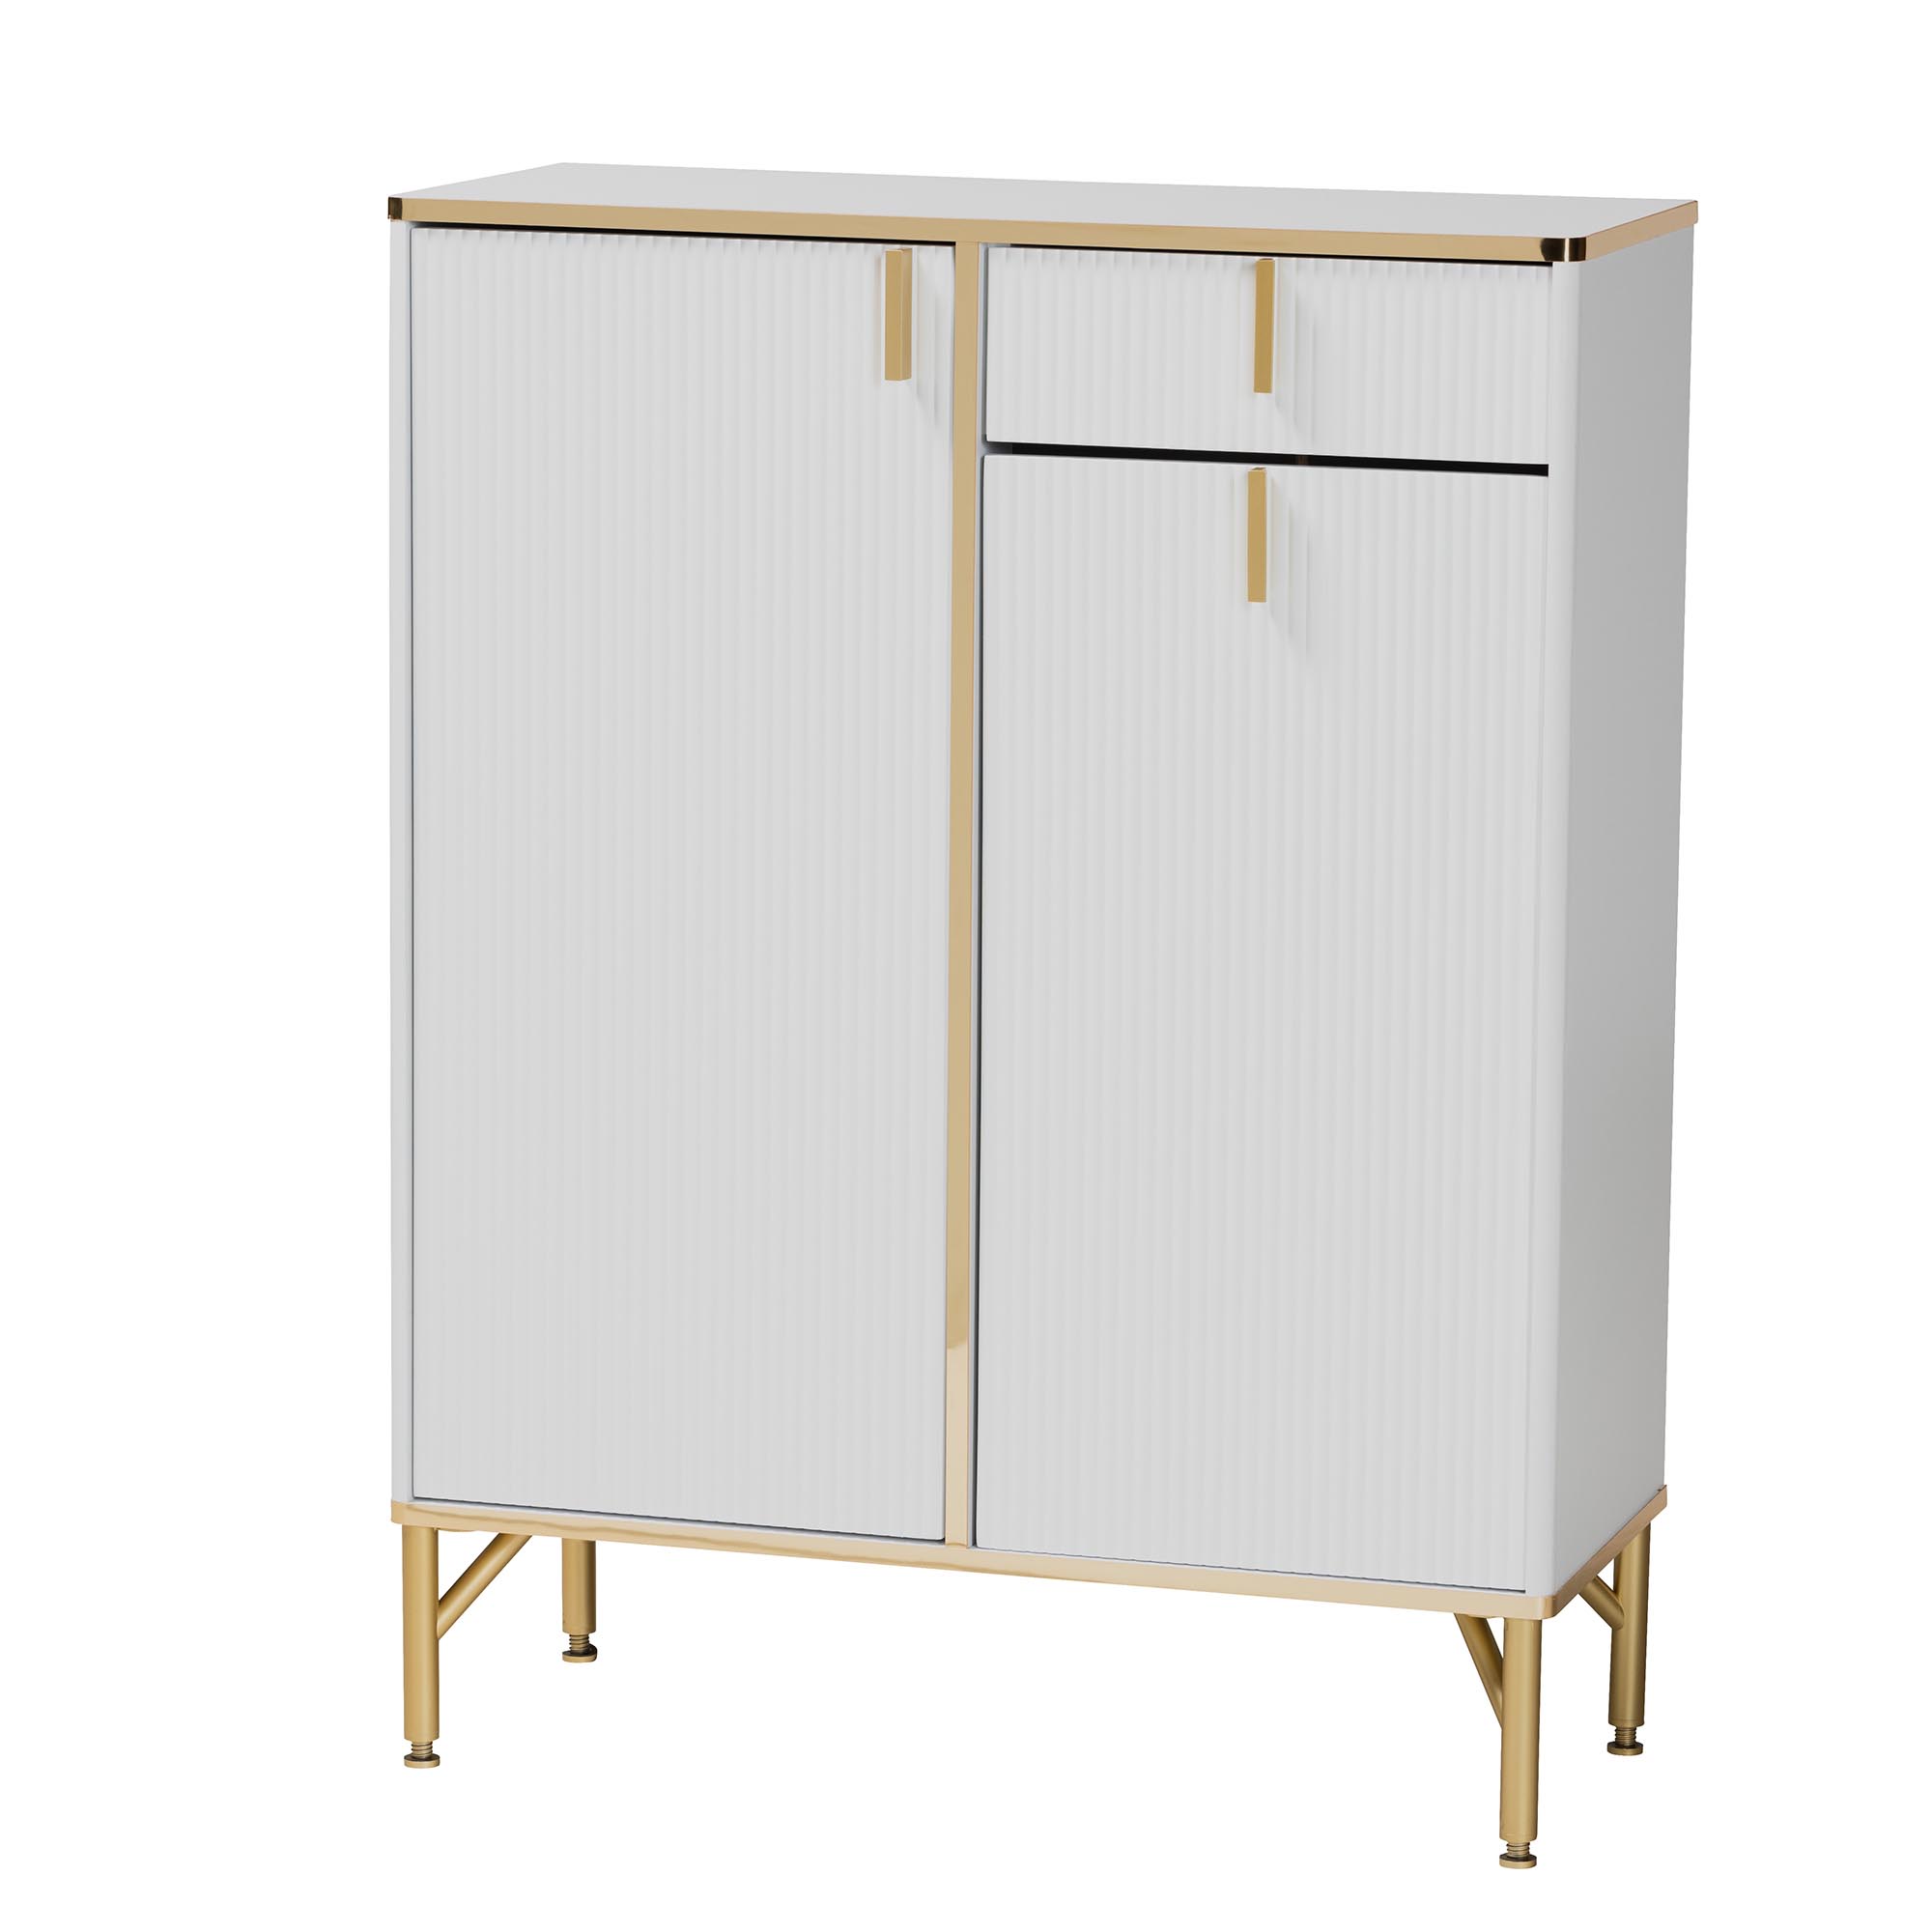 Baxton Studio Lilac Modern Glam White Wood and Gold Metal 2-Door Shoe Cabinet